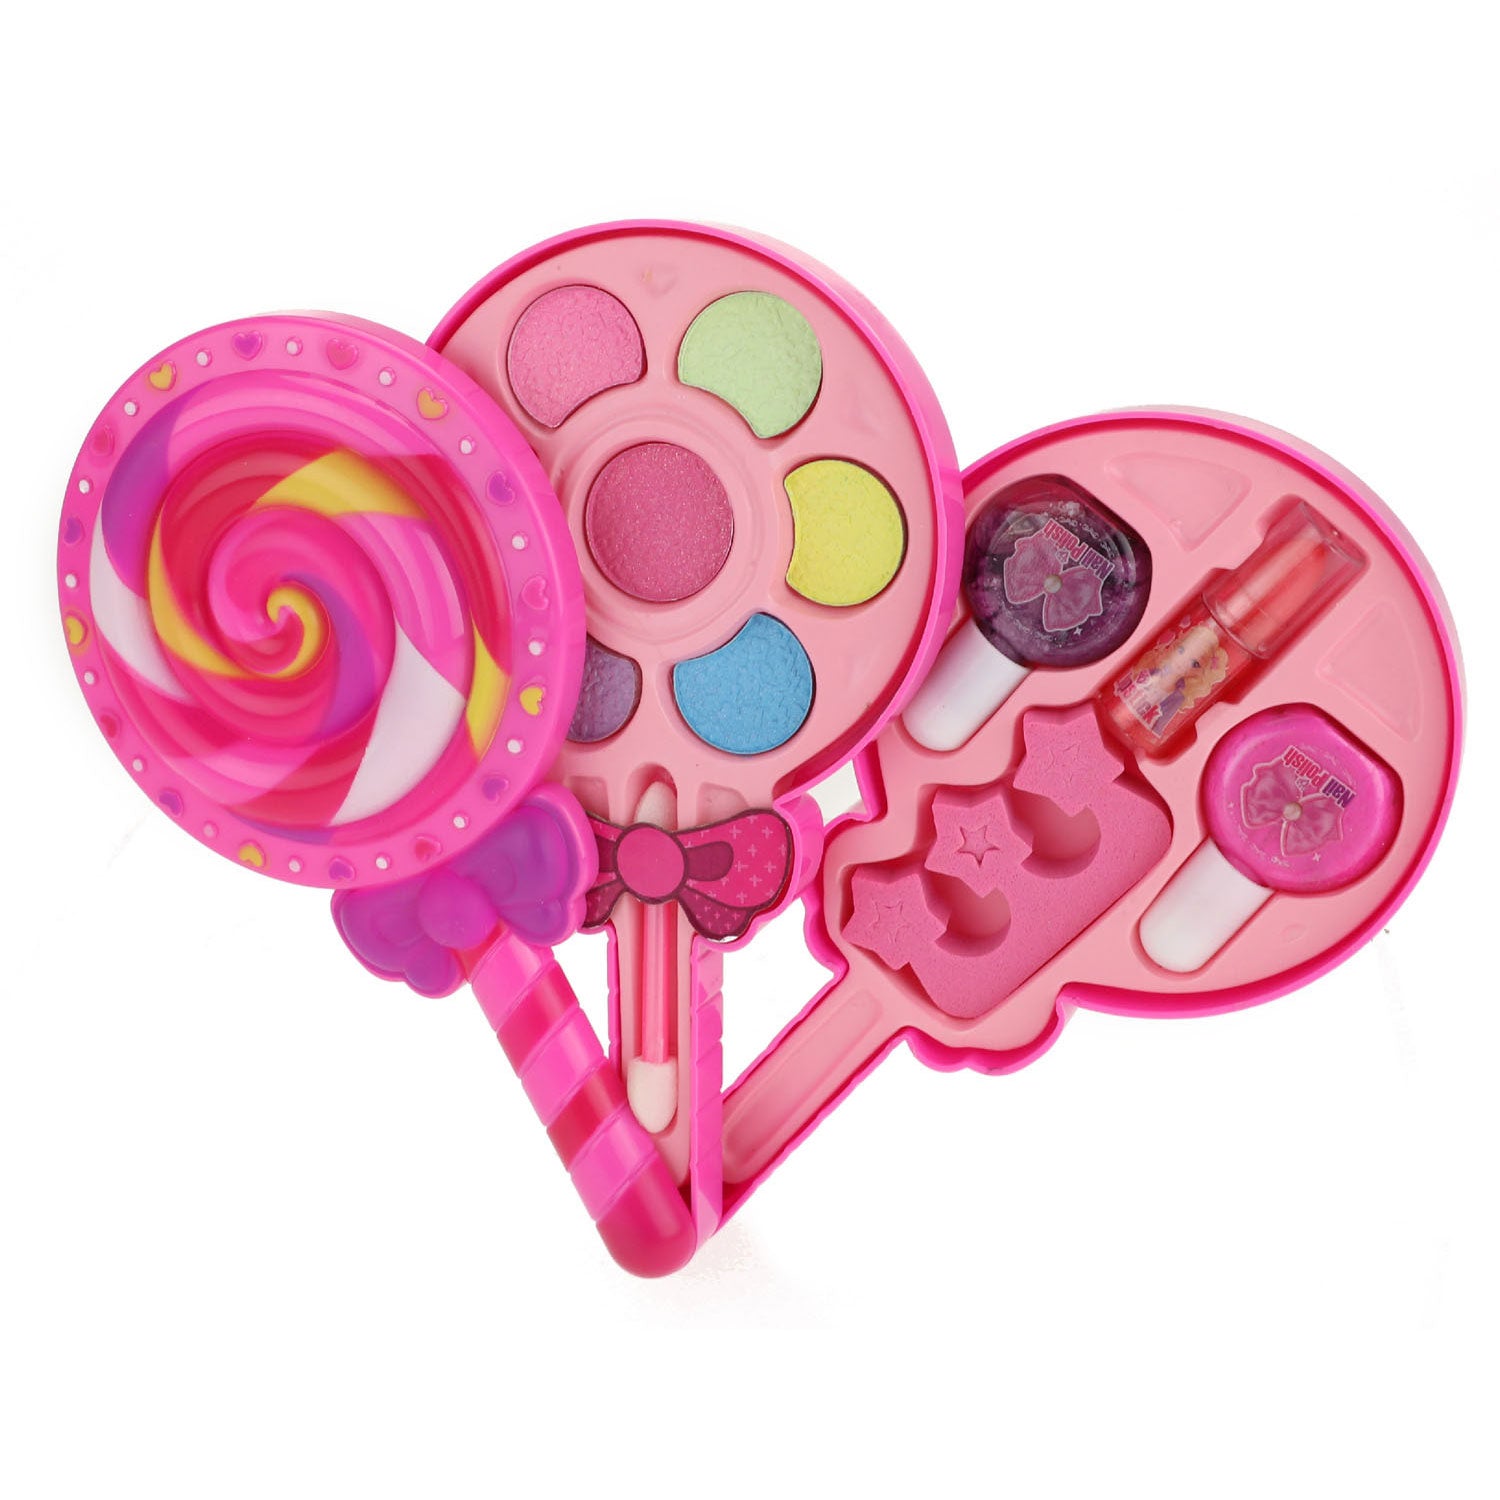 Toi-Toys Make-up in Roze Lolly